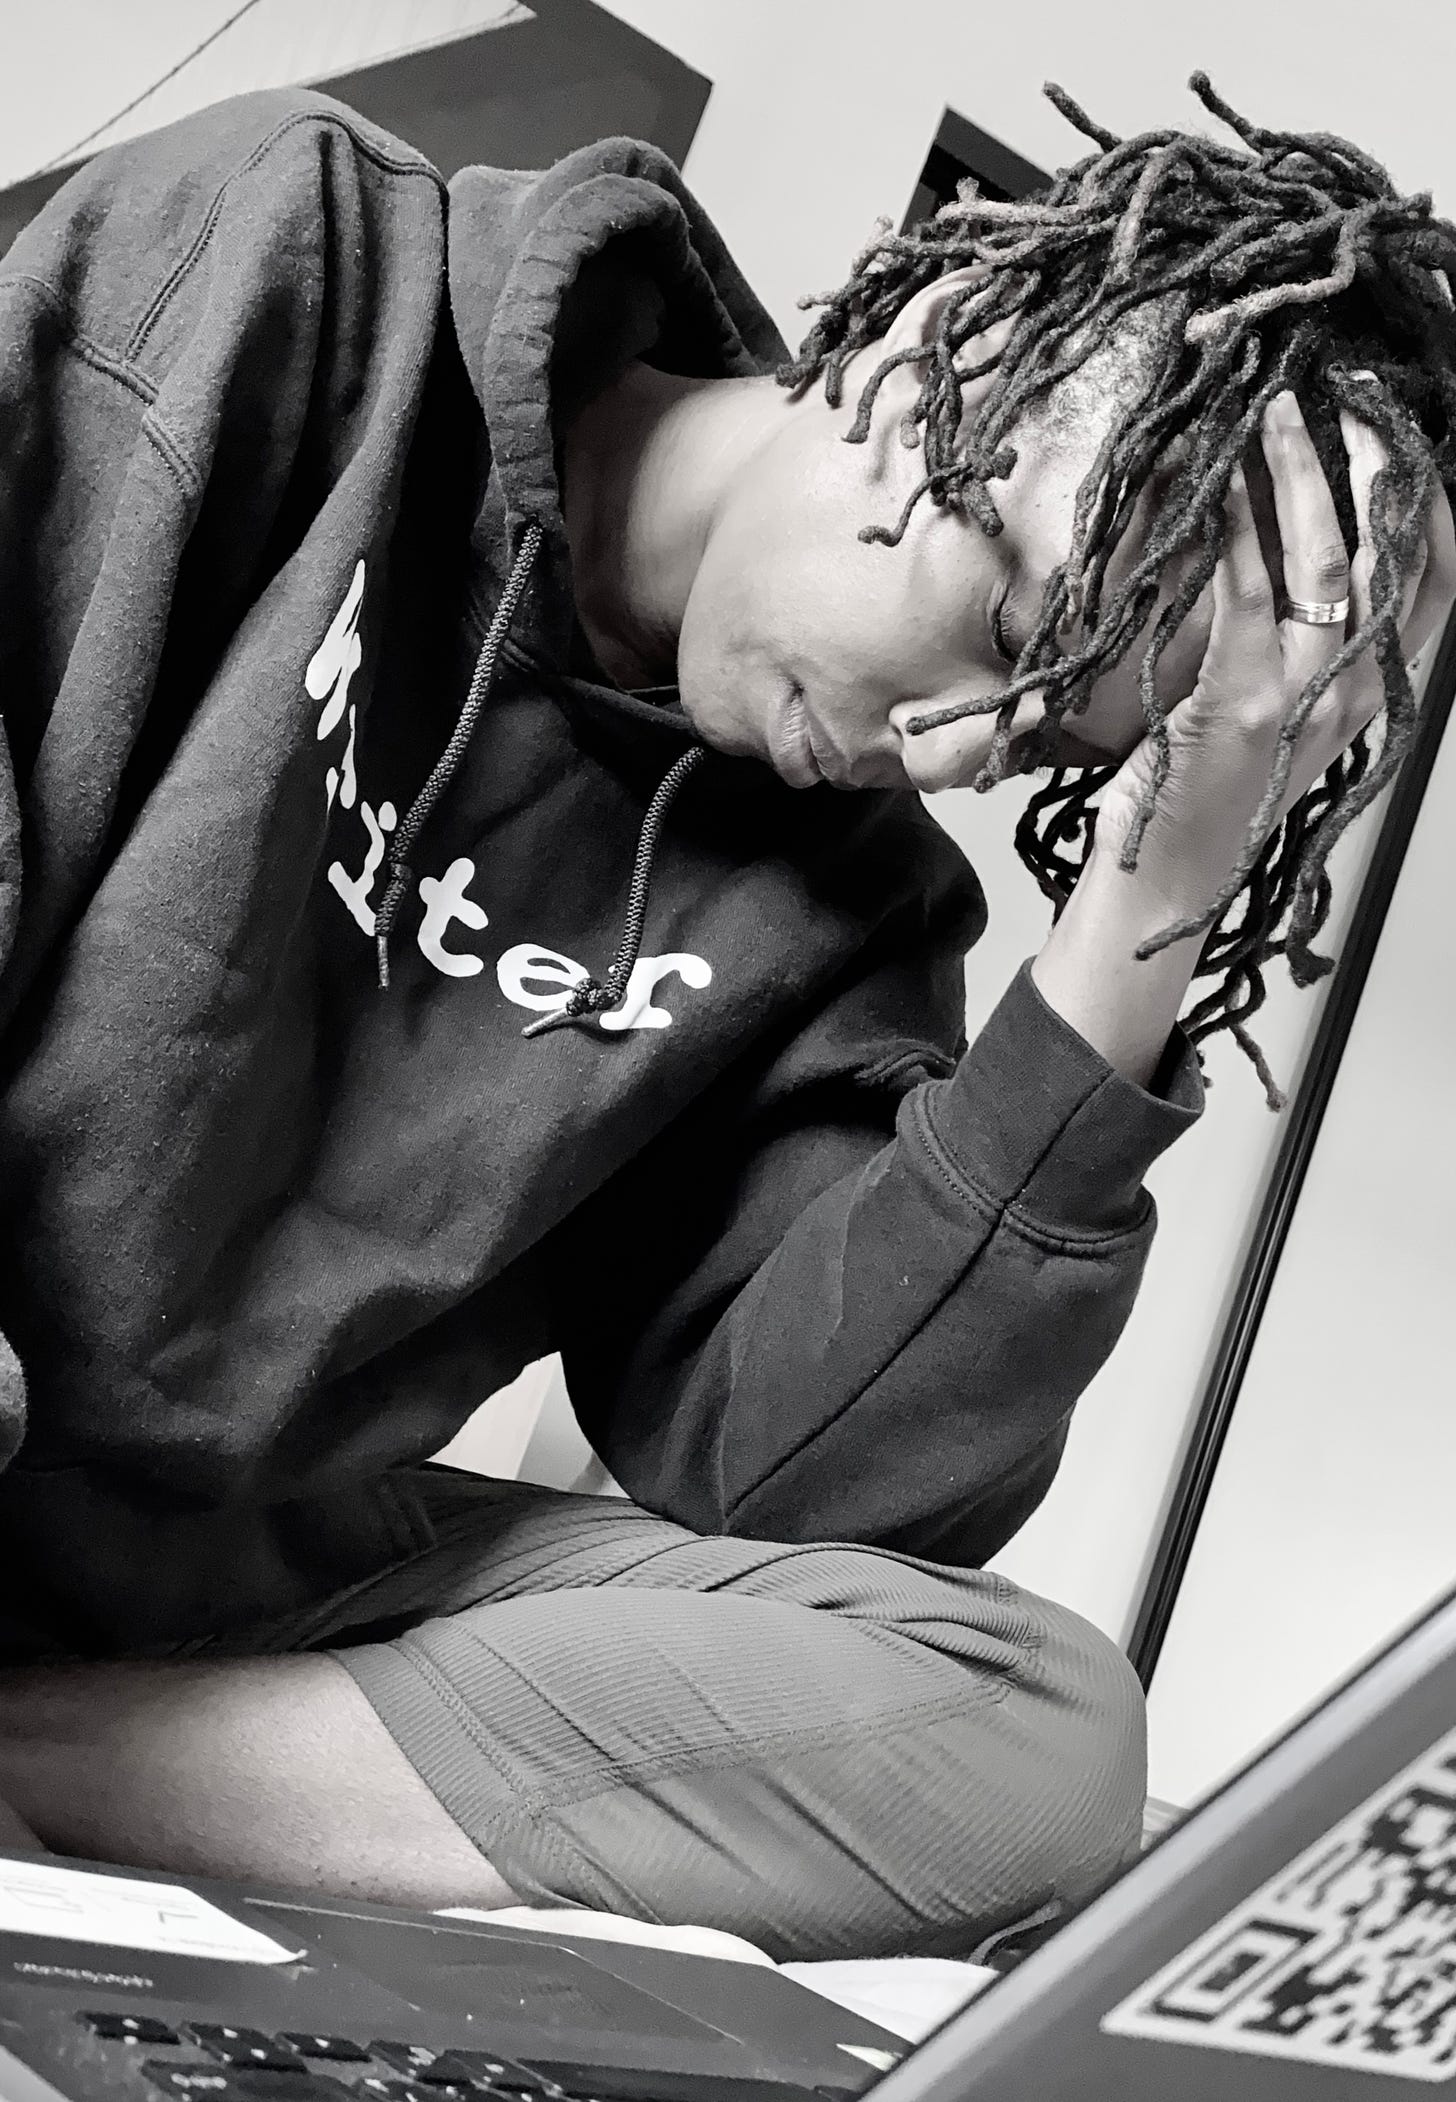 Sandra is a Black femme with locs, wearing a black hoodie with the word writer on it. The image is in black and white. Their head is in their hands looking at a lap top.